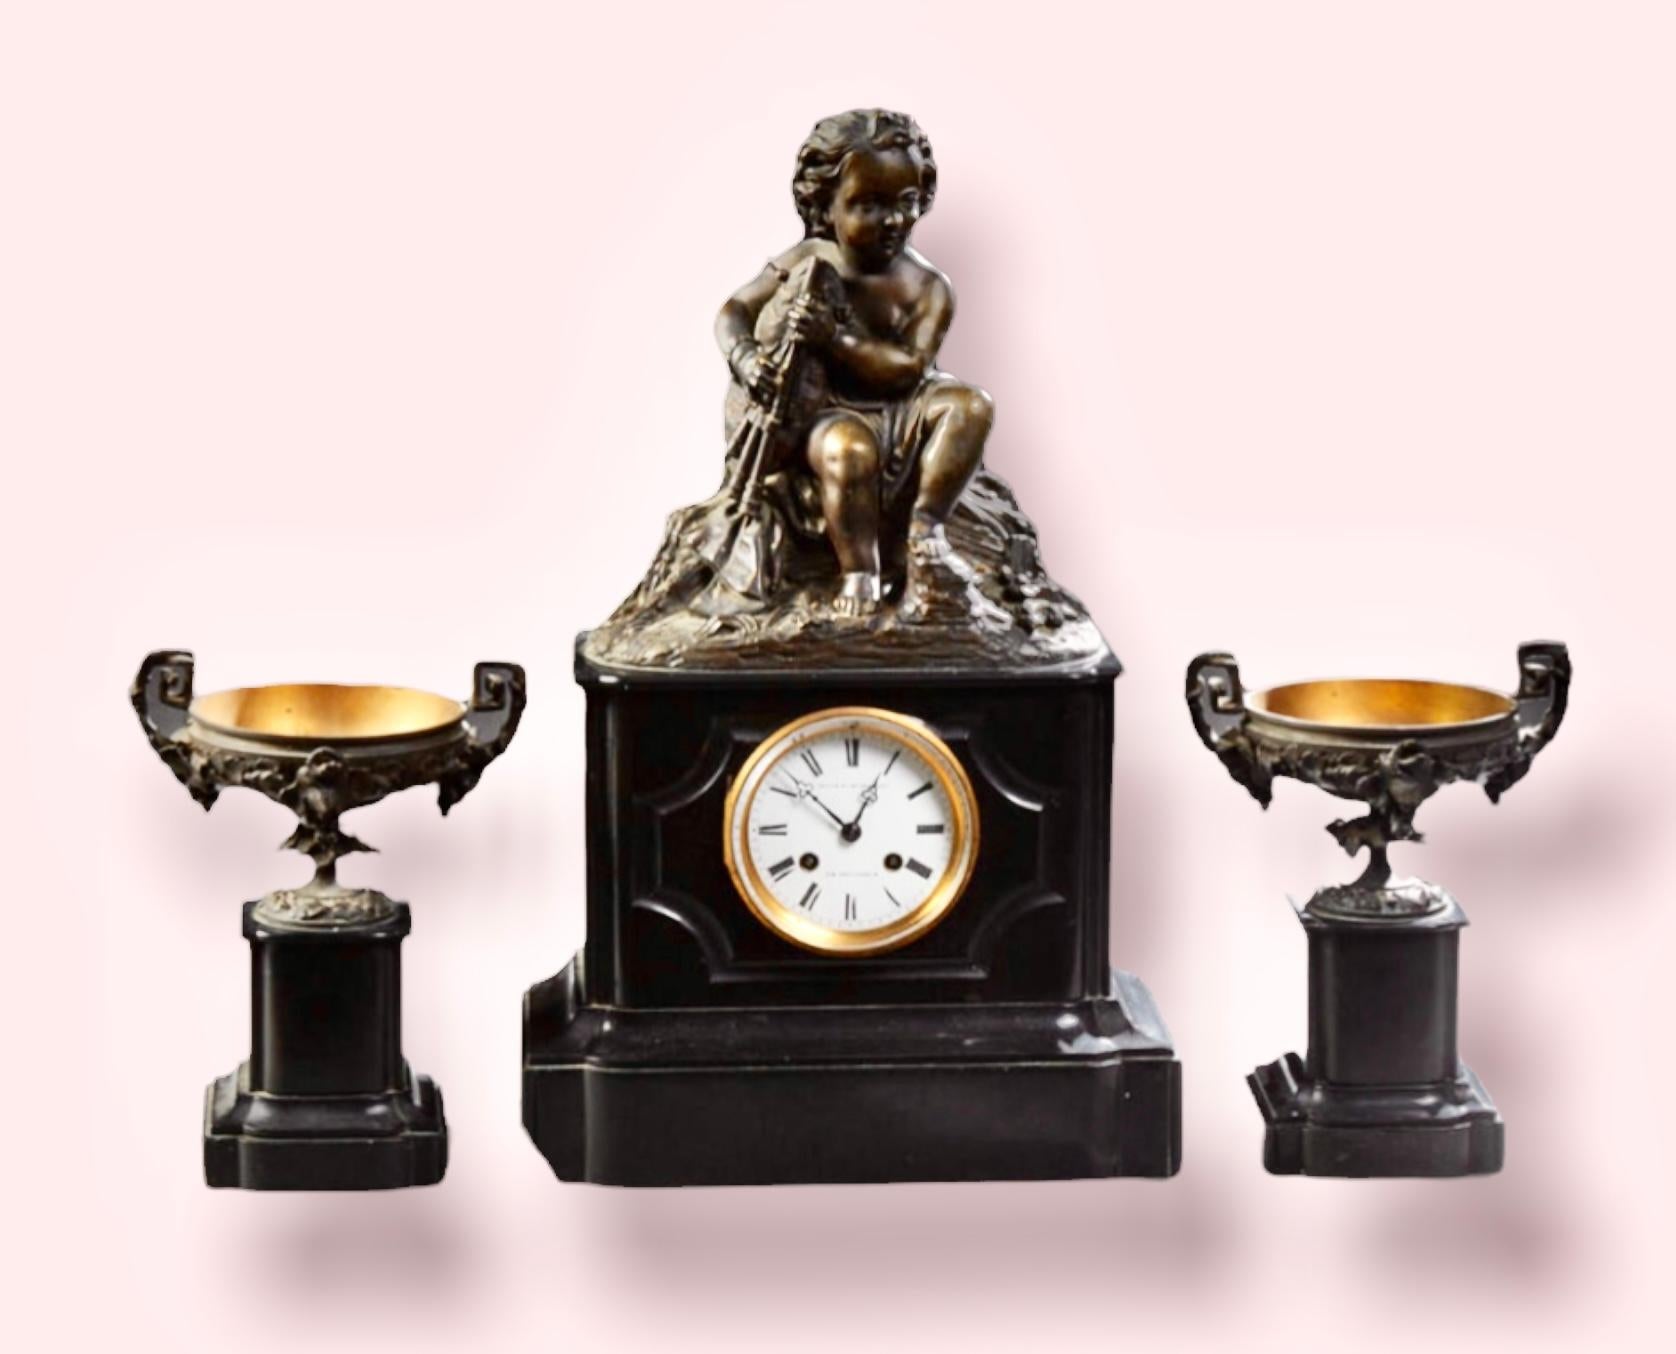 An outstanding Antique French Napoleon III three piece bronze and marble clock garniture set, c. 1880, with a bronze surmount of a putto playing a bagpipe, over a drum clock, time and strike, with an enamel dial on a sloping stepped base; together